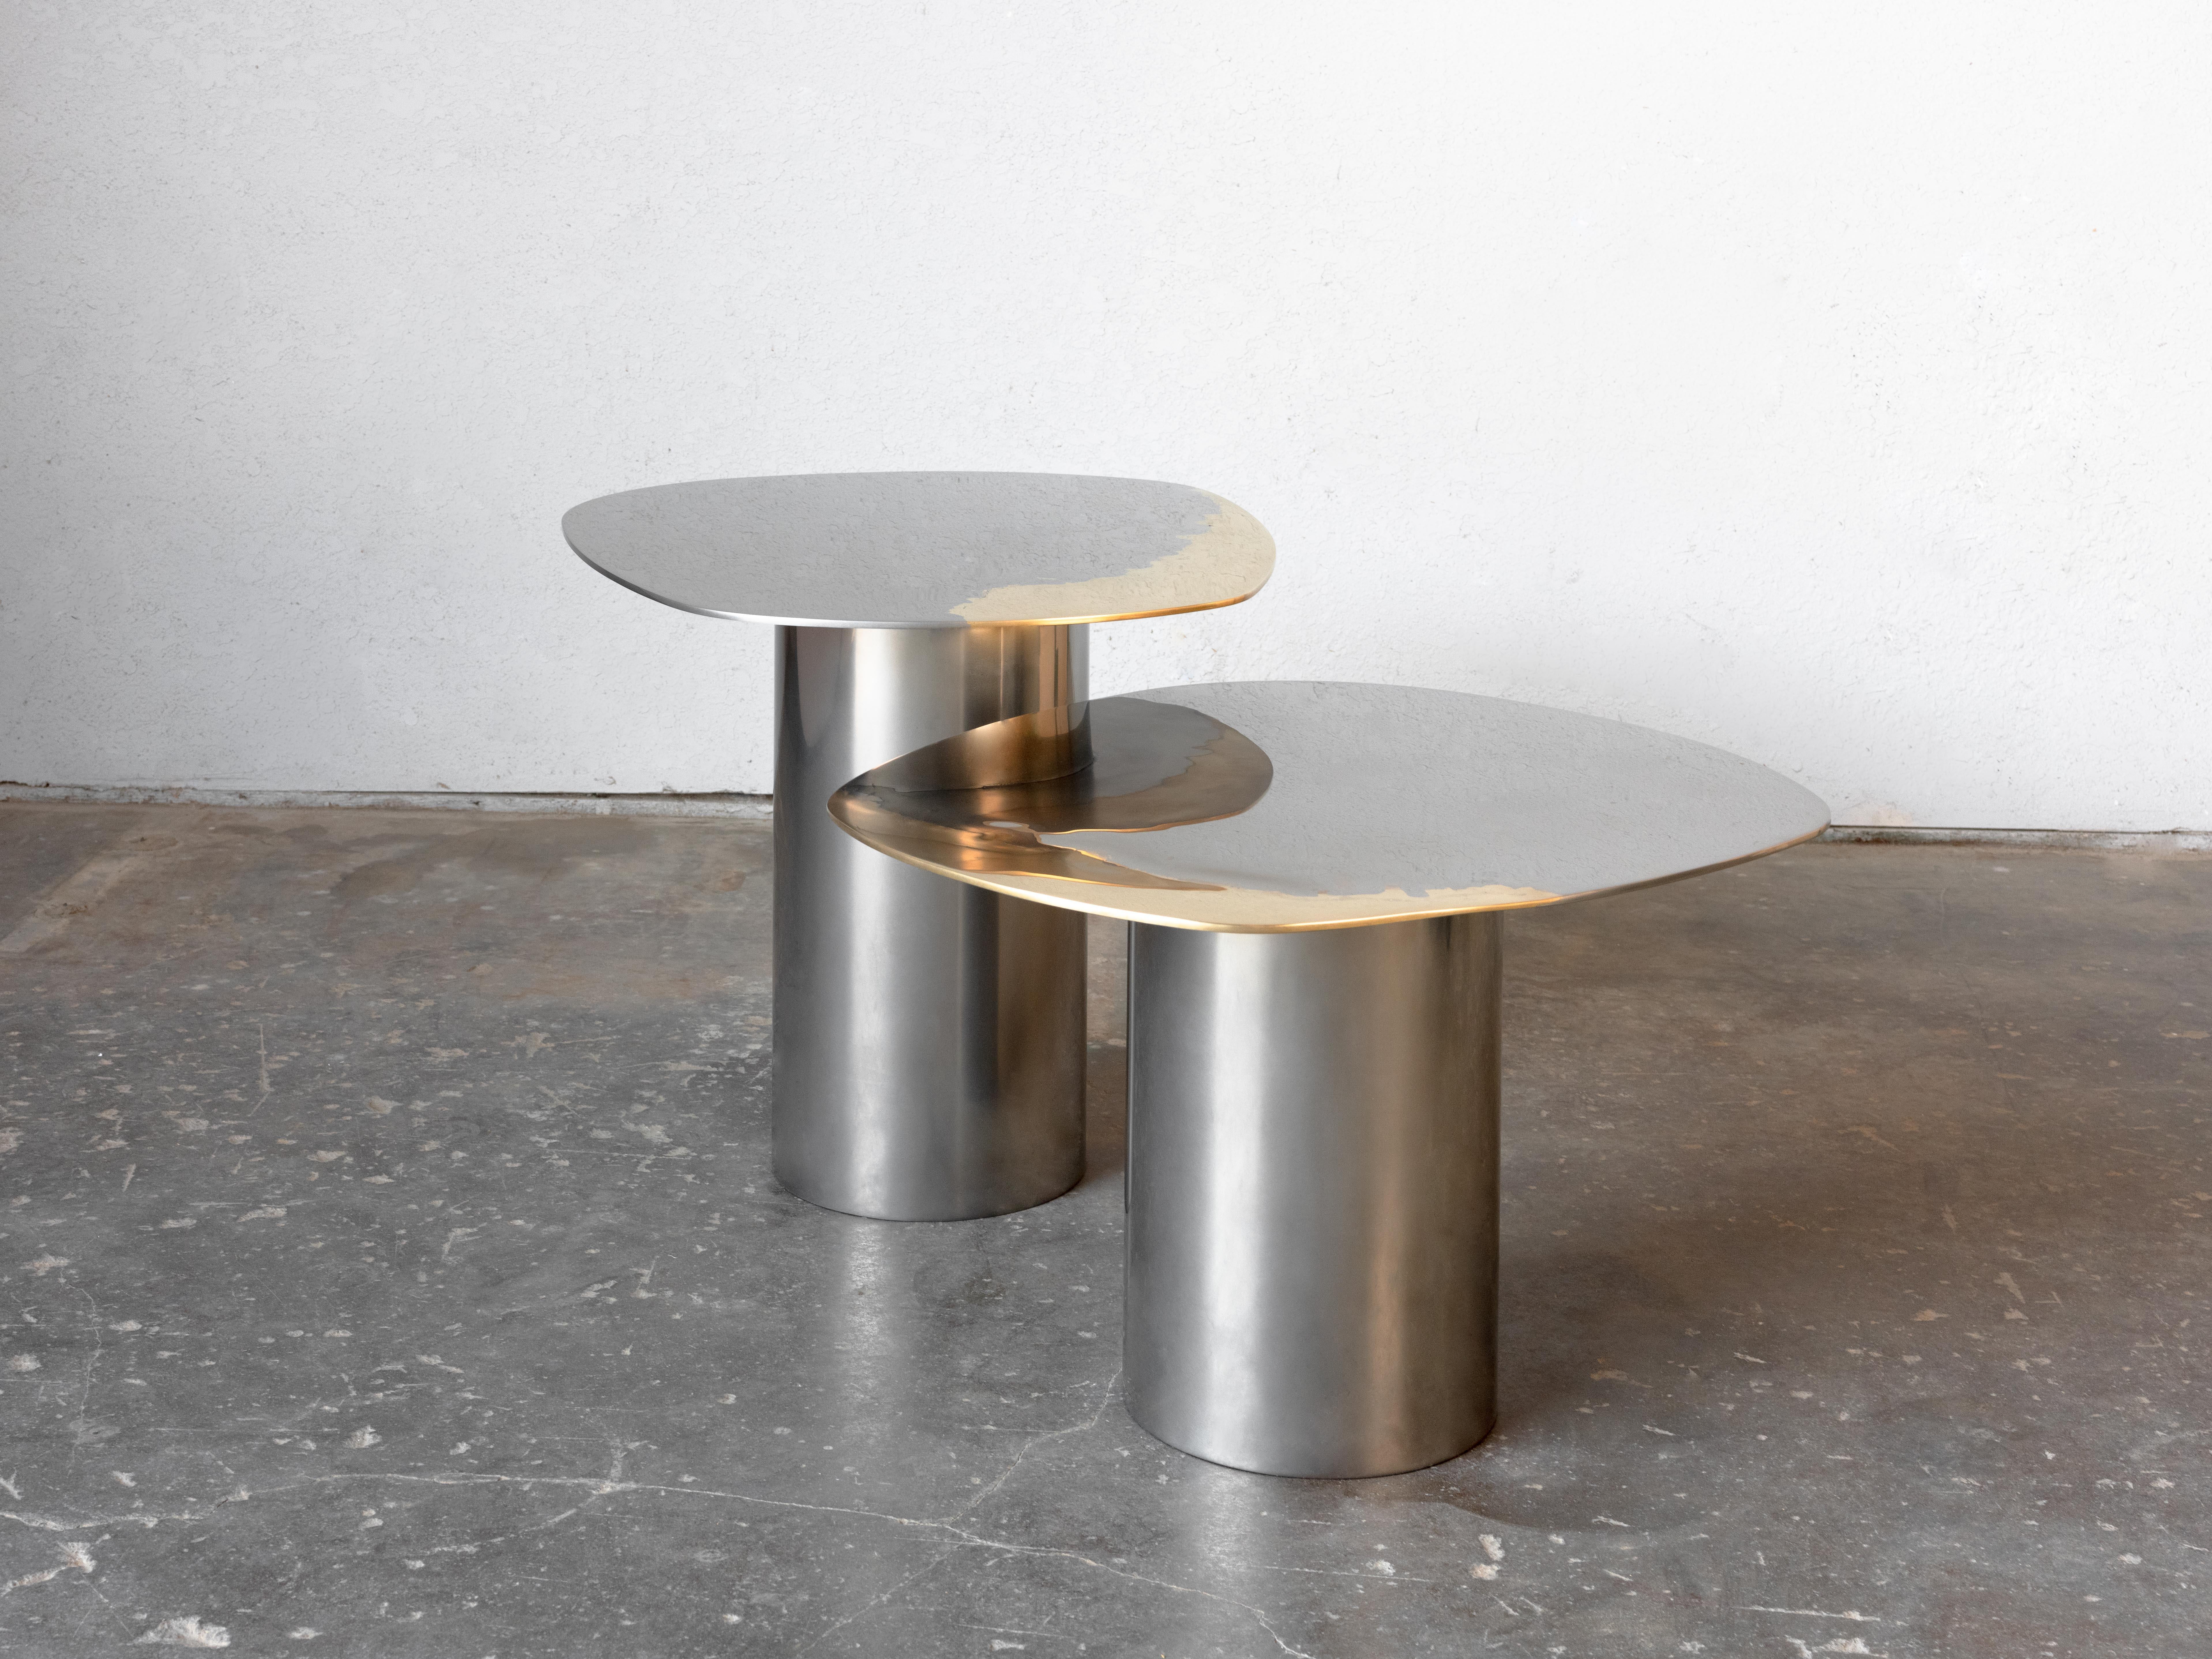 Custom Polished Bimetal Brass Stainless Steel Transition Side Tables  In New Condition For Sale In Santa Monica, CA